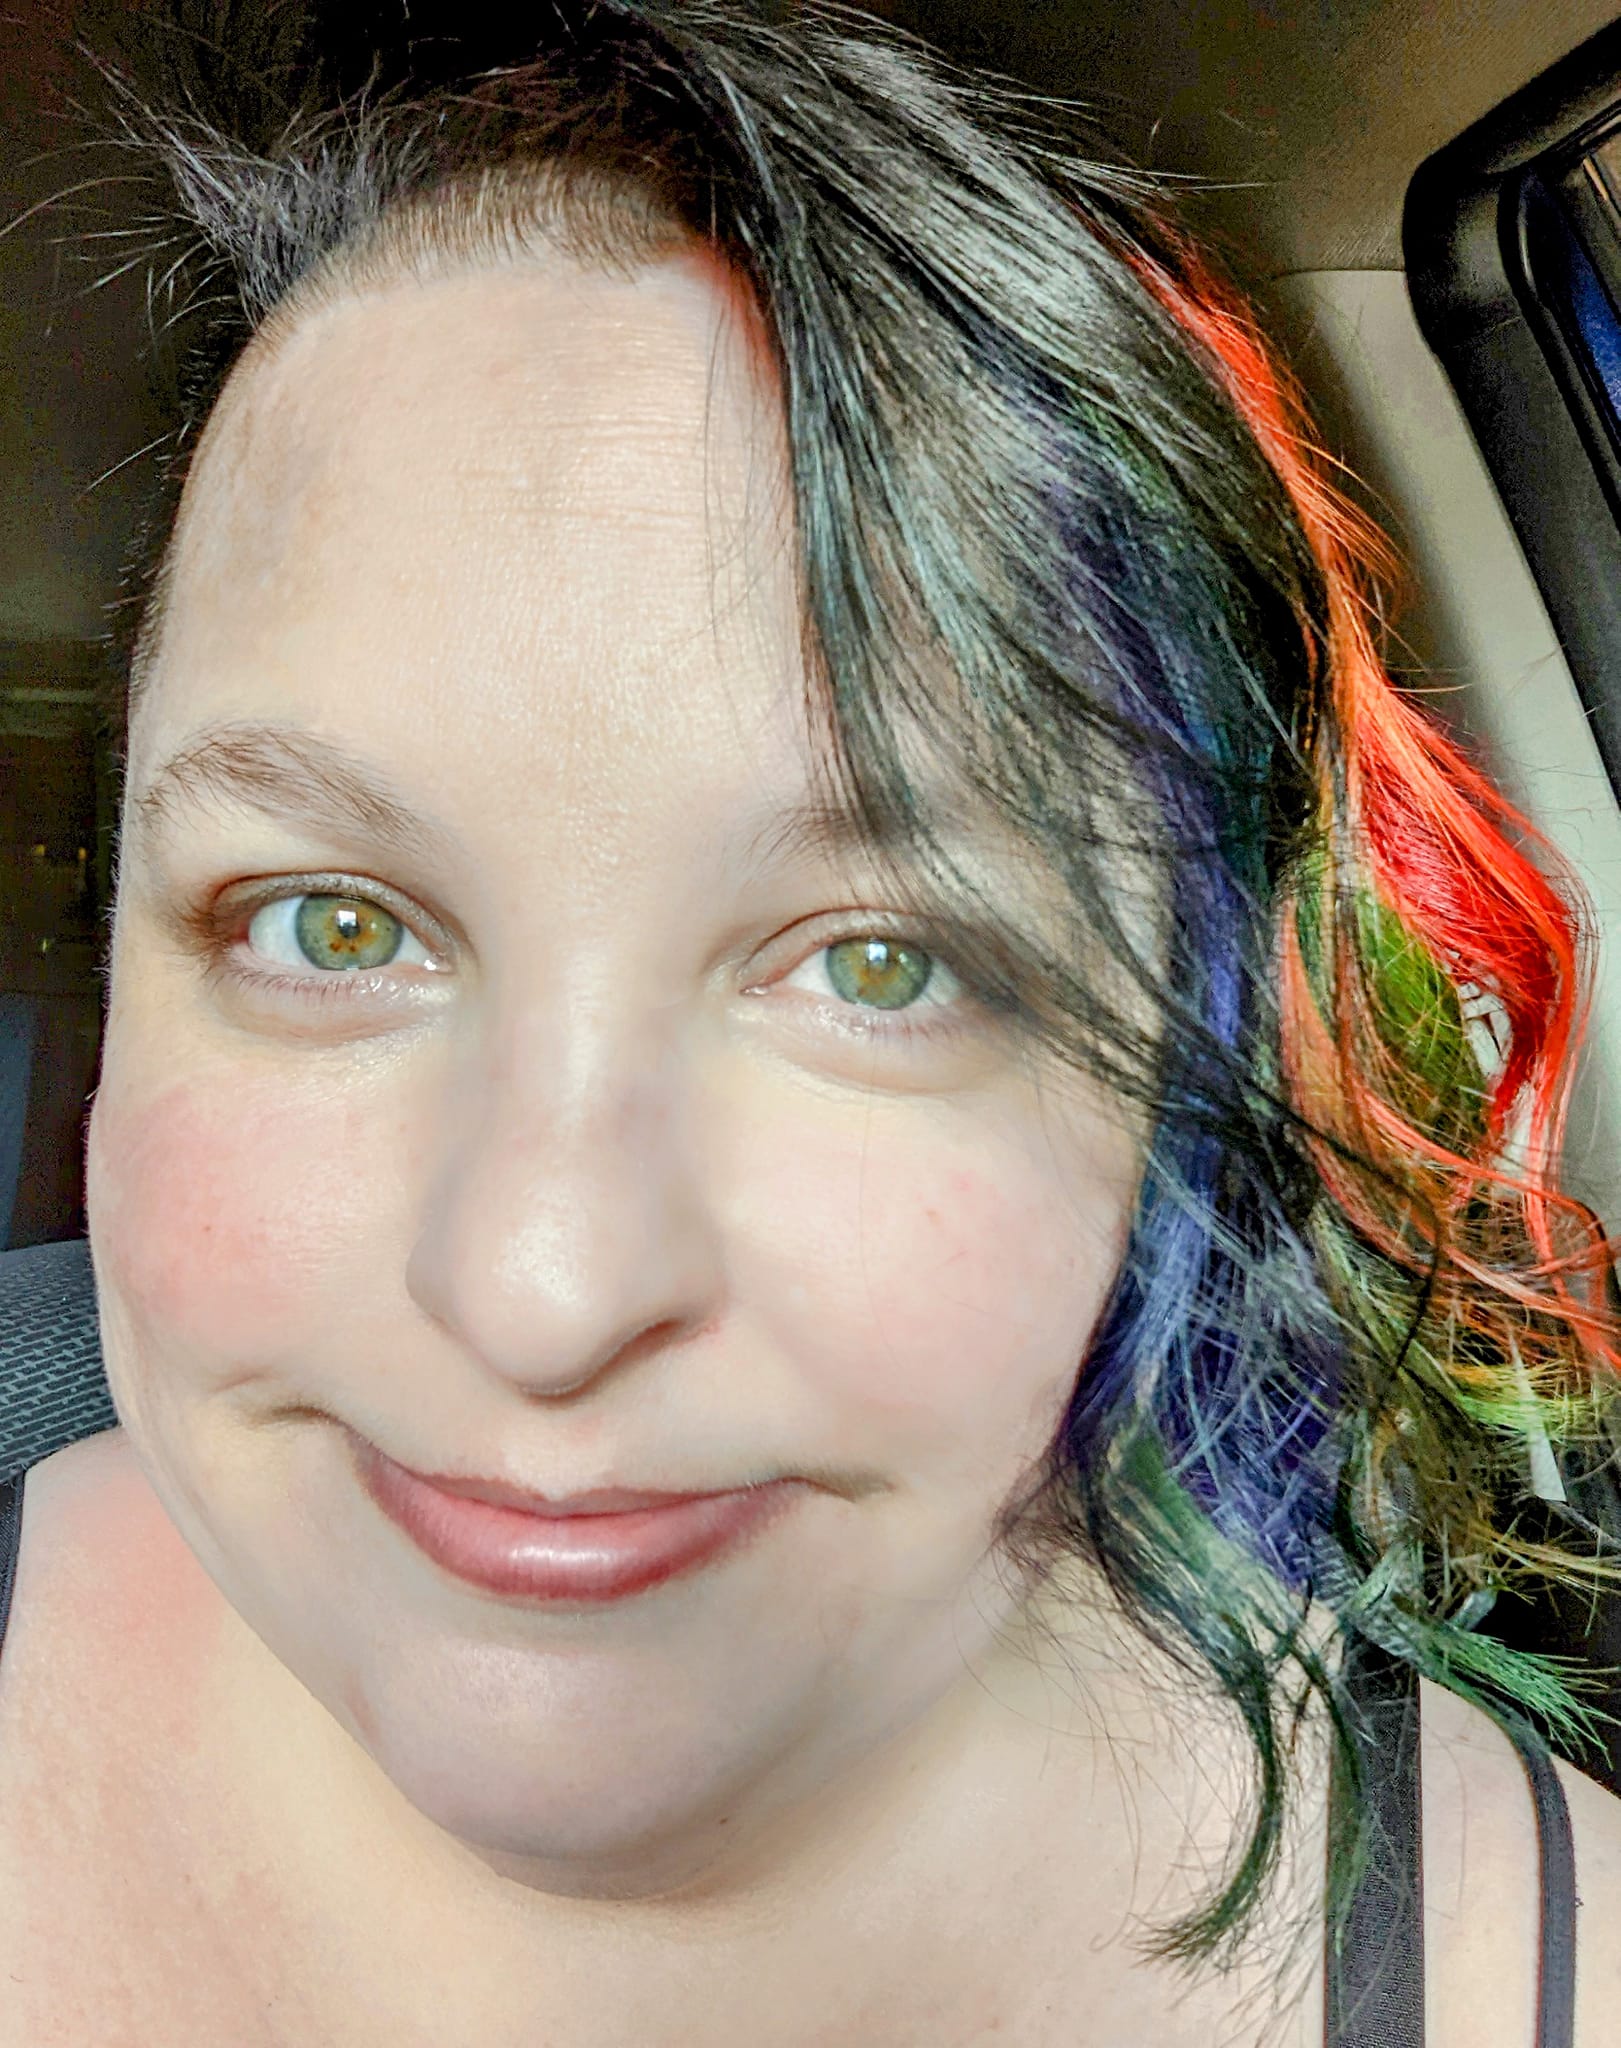 Author and artist Raven Oak with rainbow colored hair.